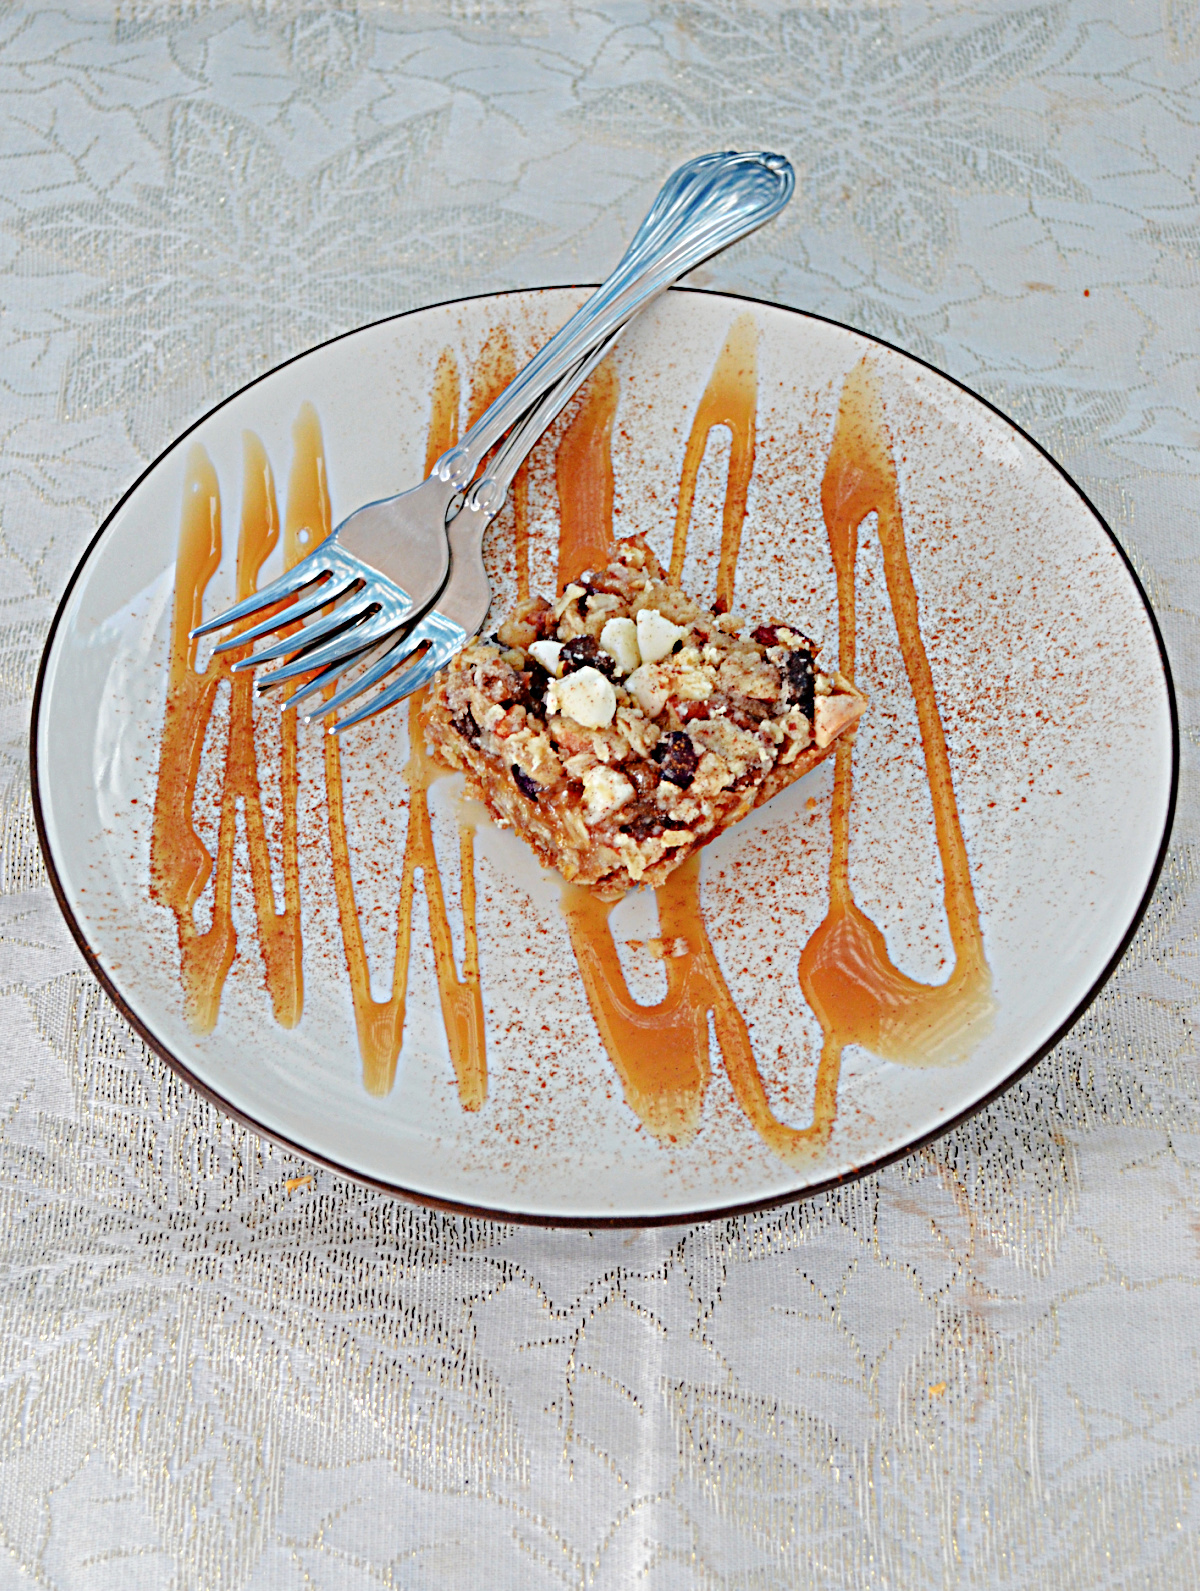 A plate topped with an Oatmeal Apricto Cherry Bar, drizzled in caramel sauce, with two forks on the plate.